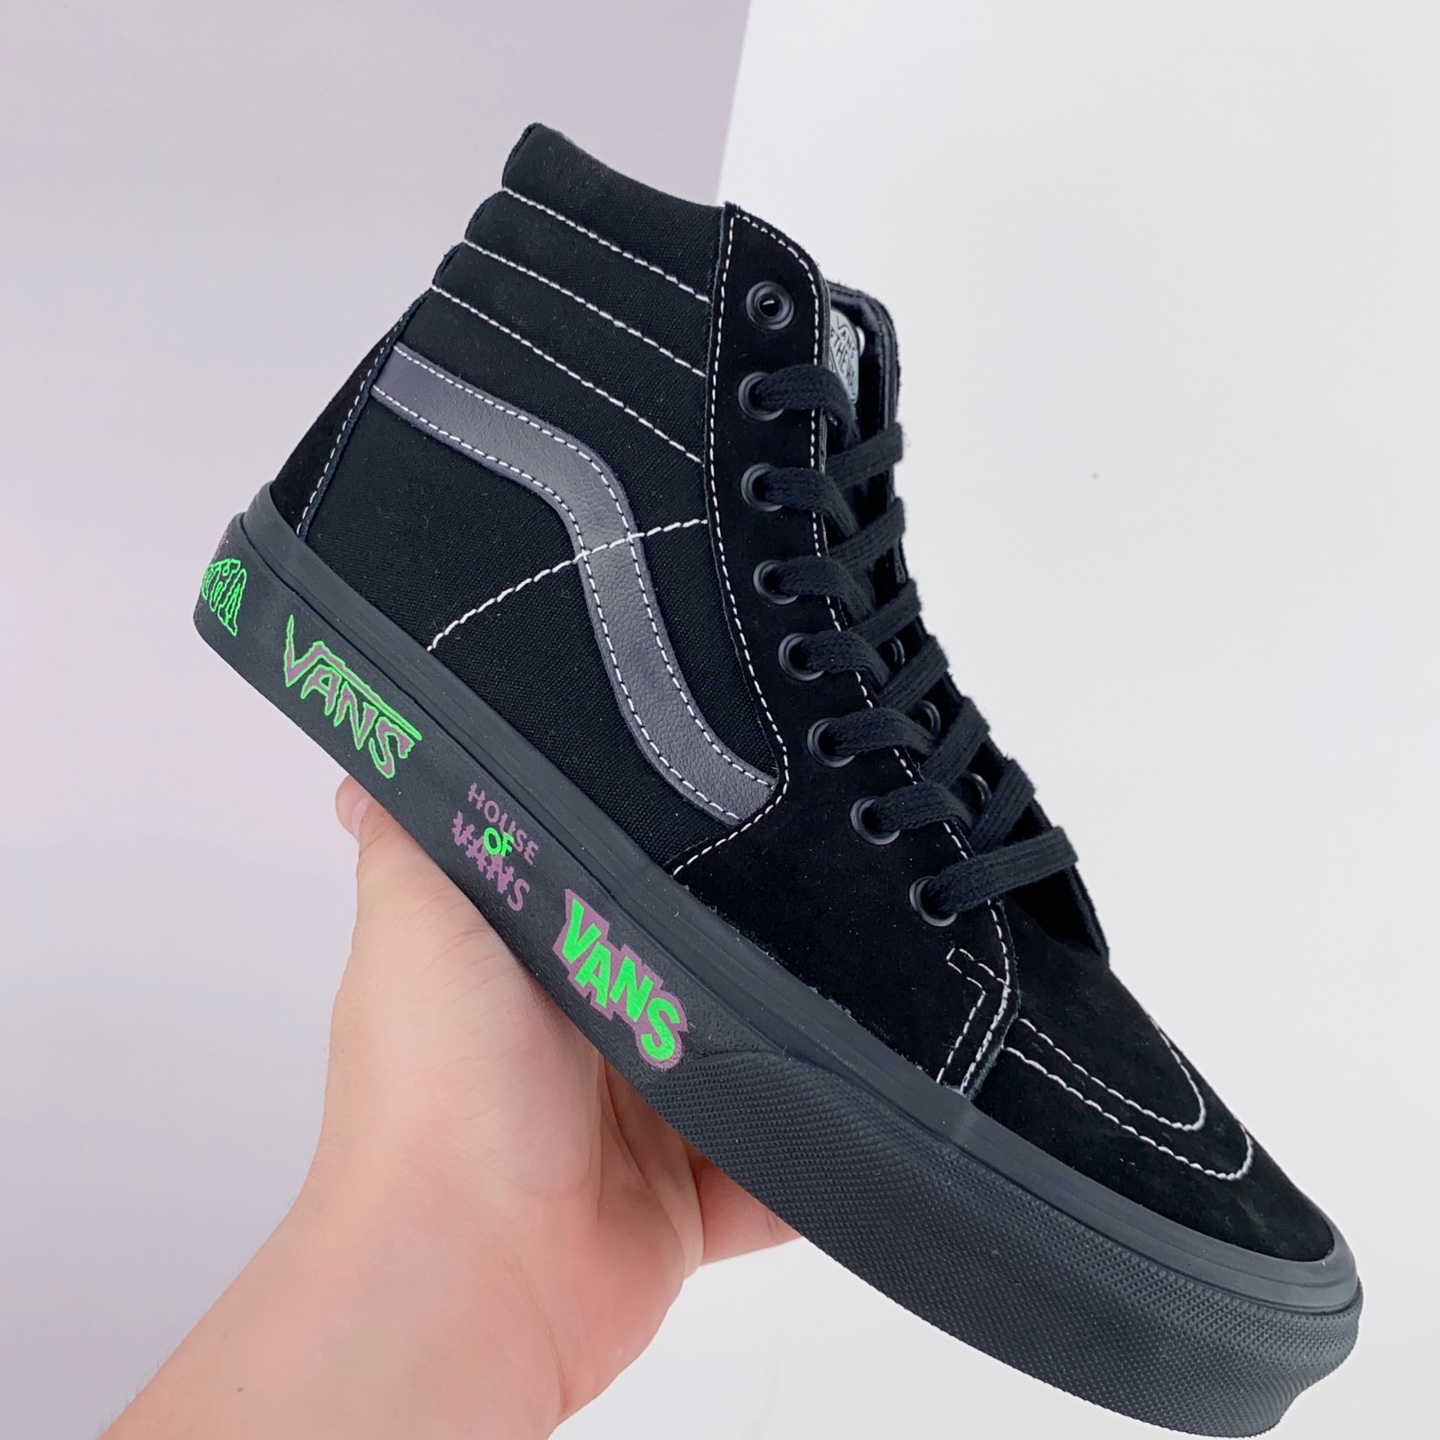 Vans SK8-HI Black Green Sneakers - Latest Release | Limited Edition